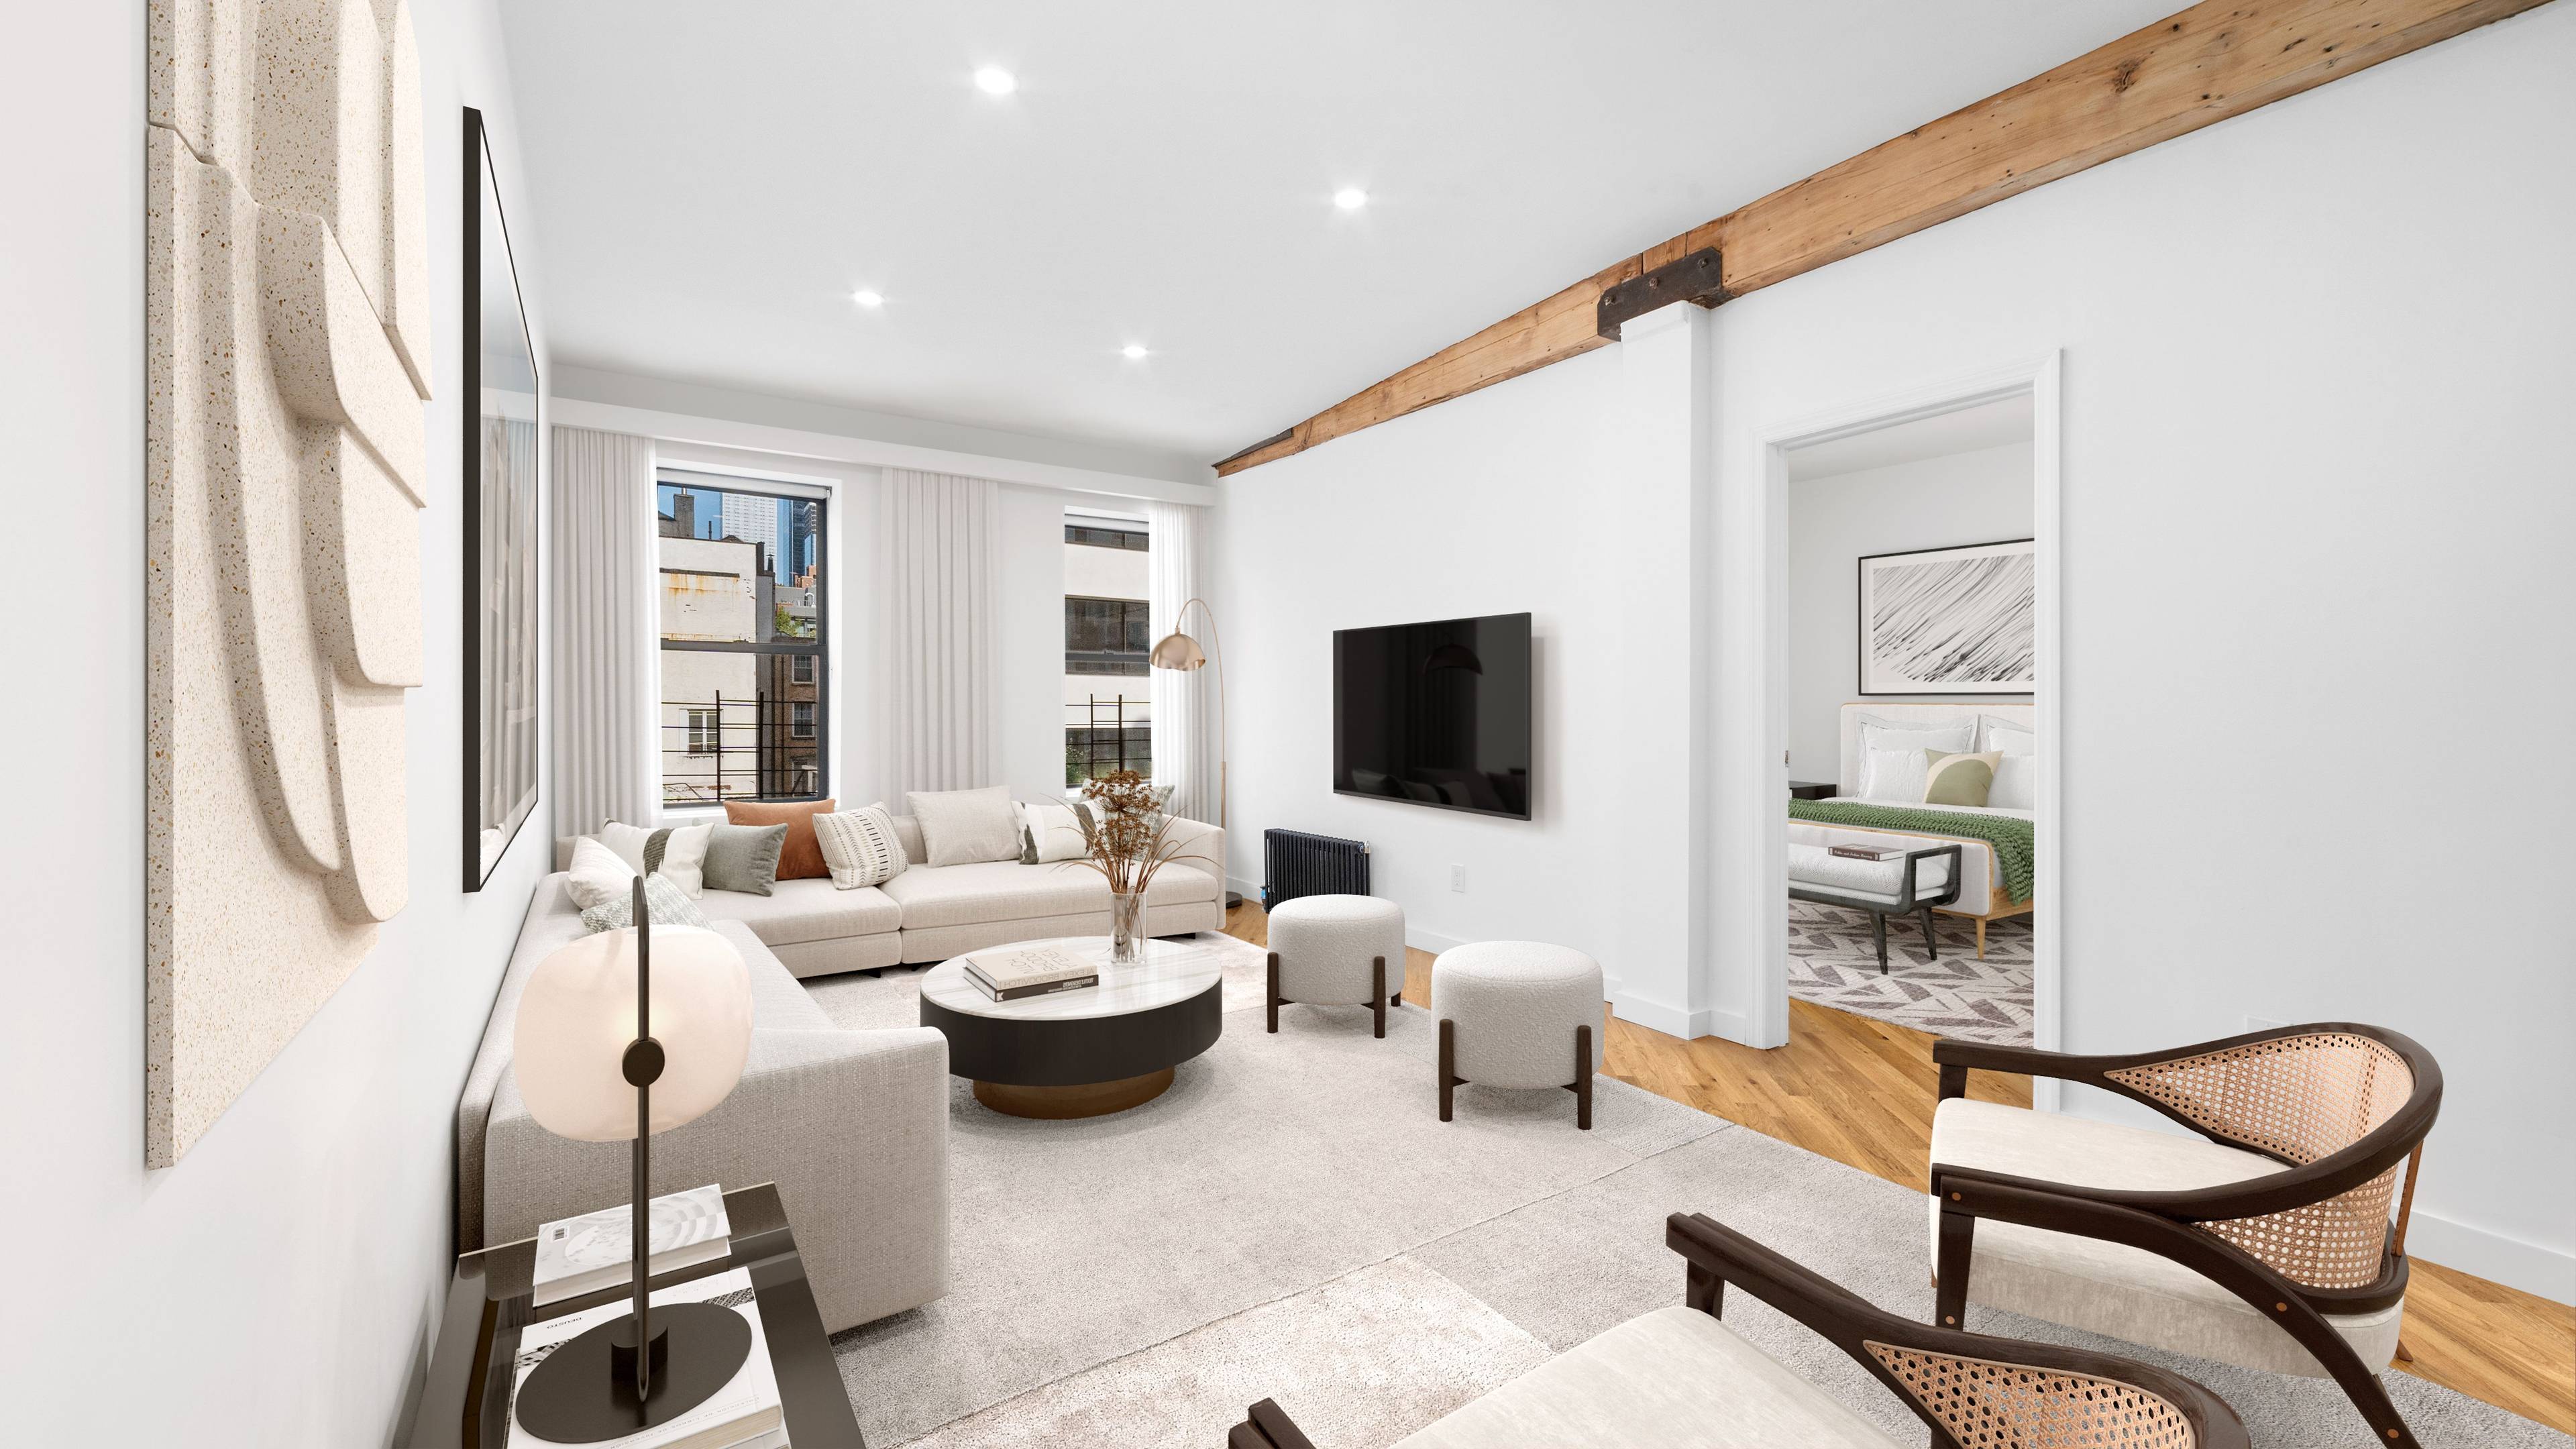 452 West 19th Street, 3A is an amazing 1024 SF oversized one bedroom loft that has just undergone a full renovation.